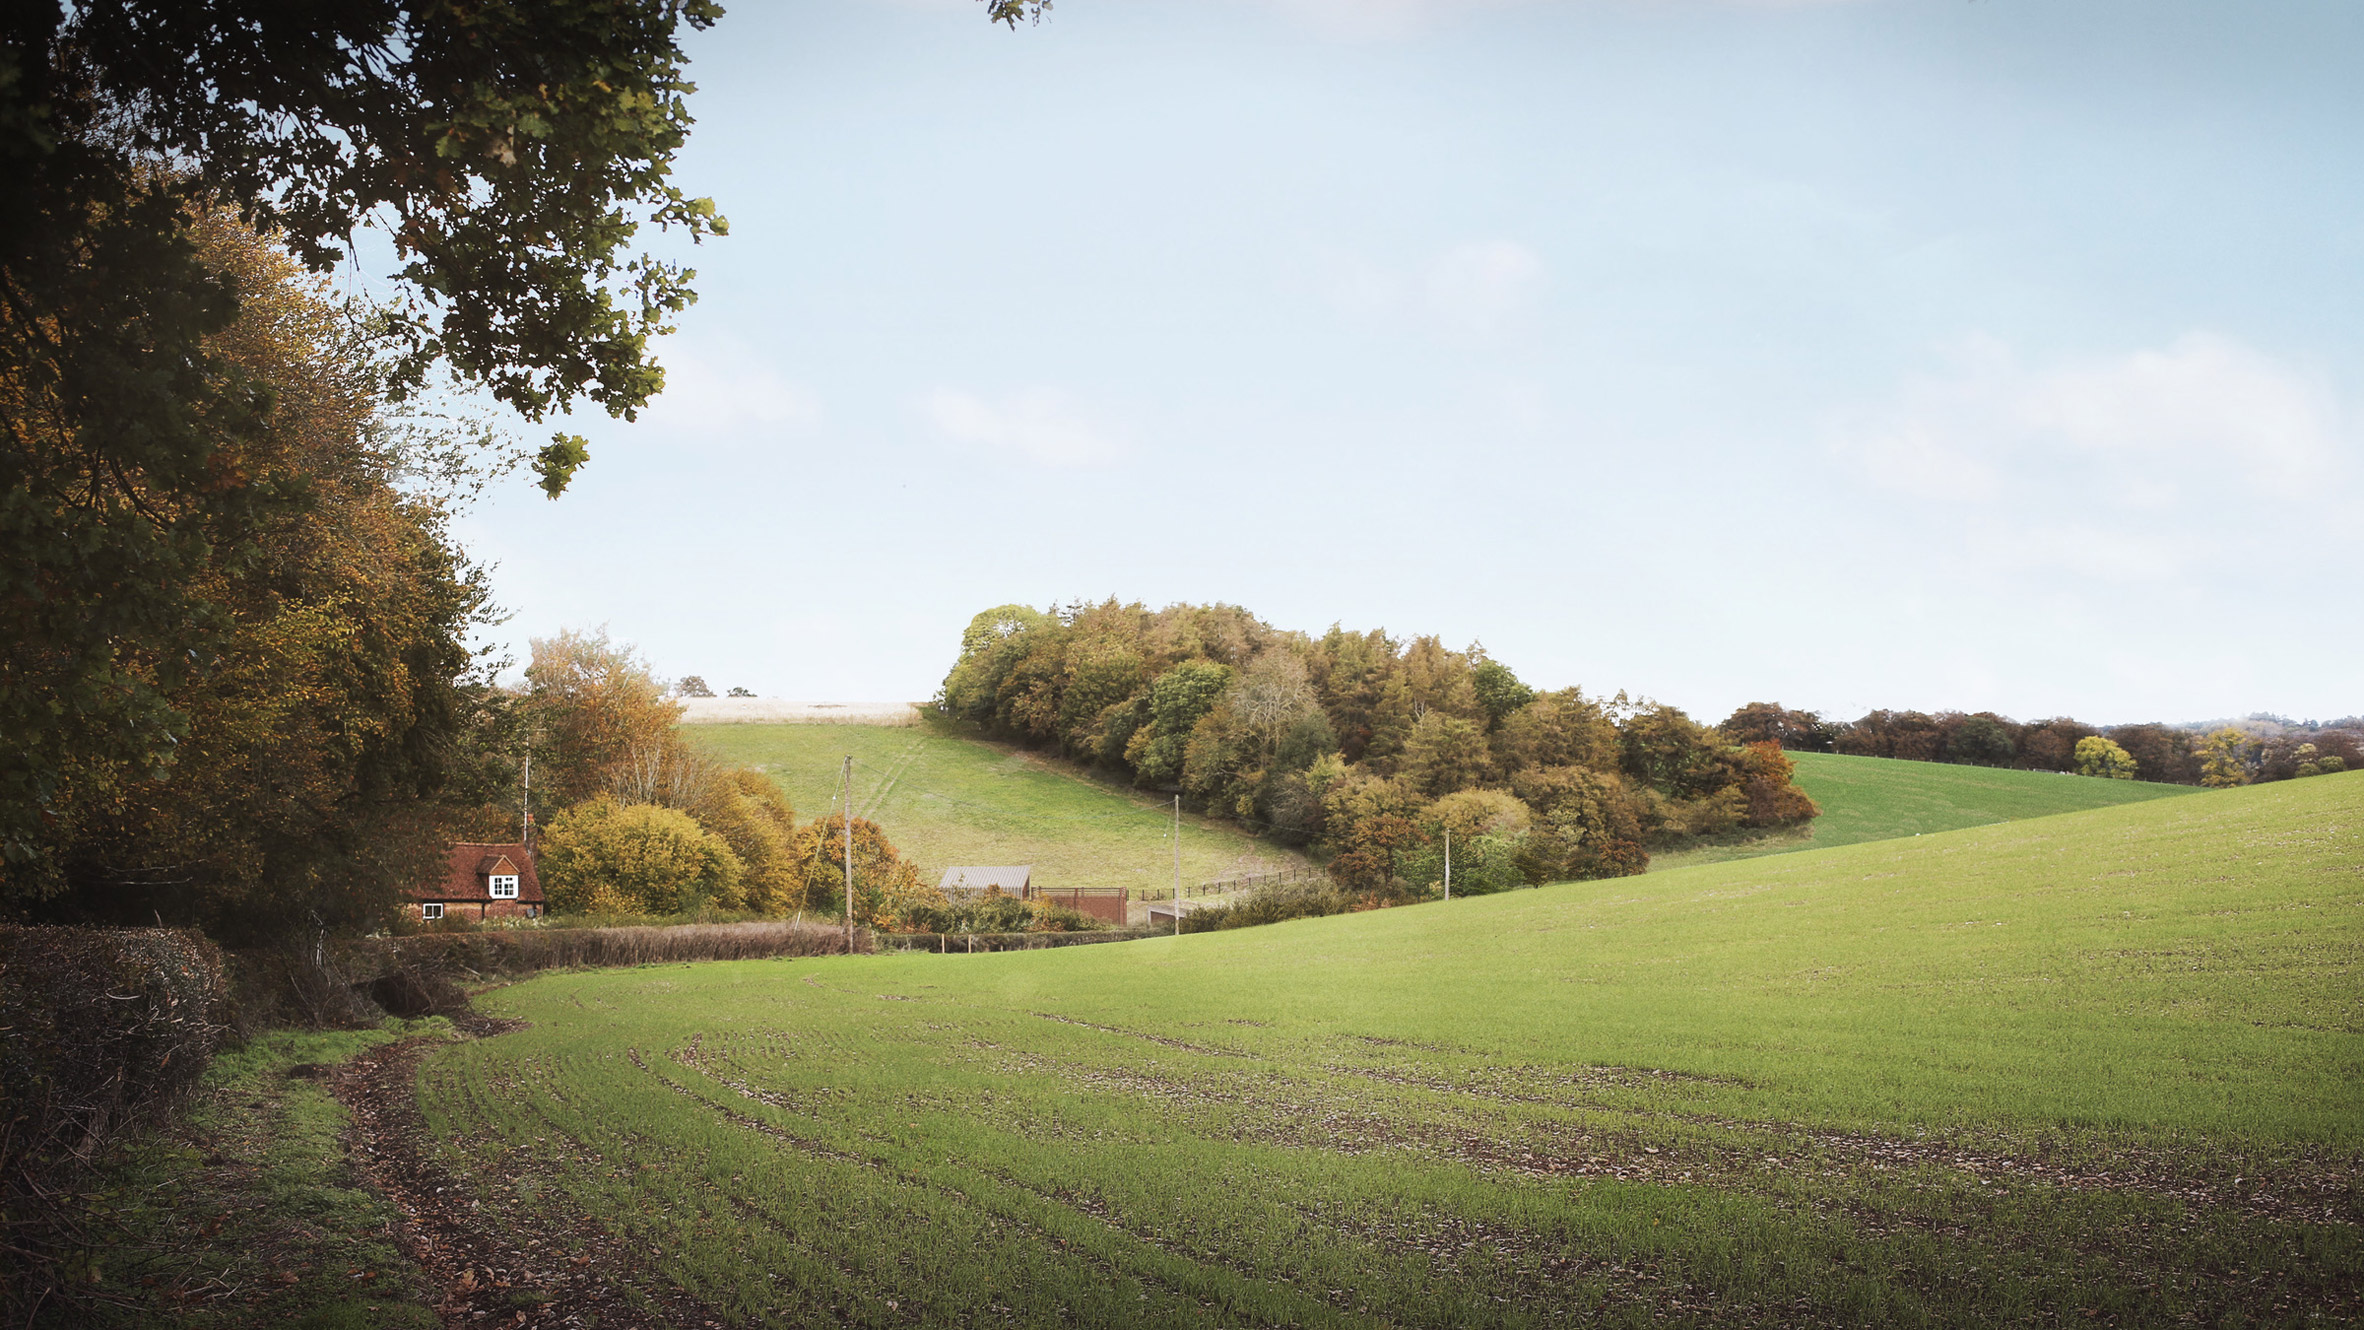 HS2 ventilation shaft disguised as a barn in Chilterns Area of Outstanding Natural Beauty